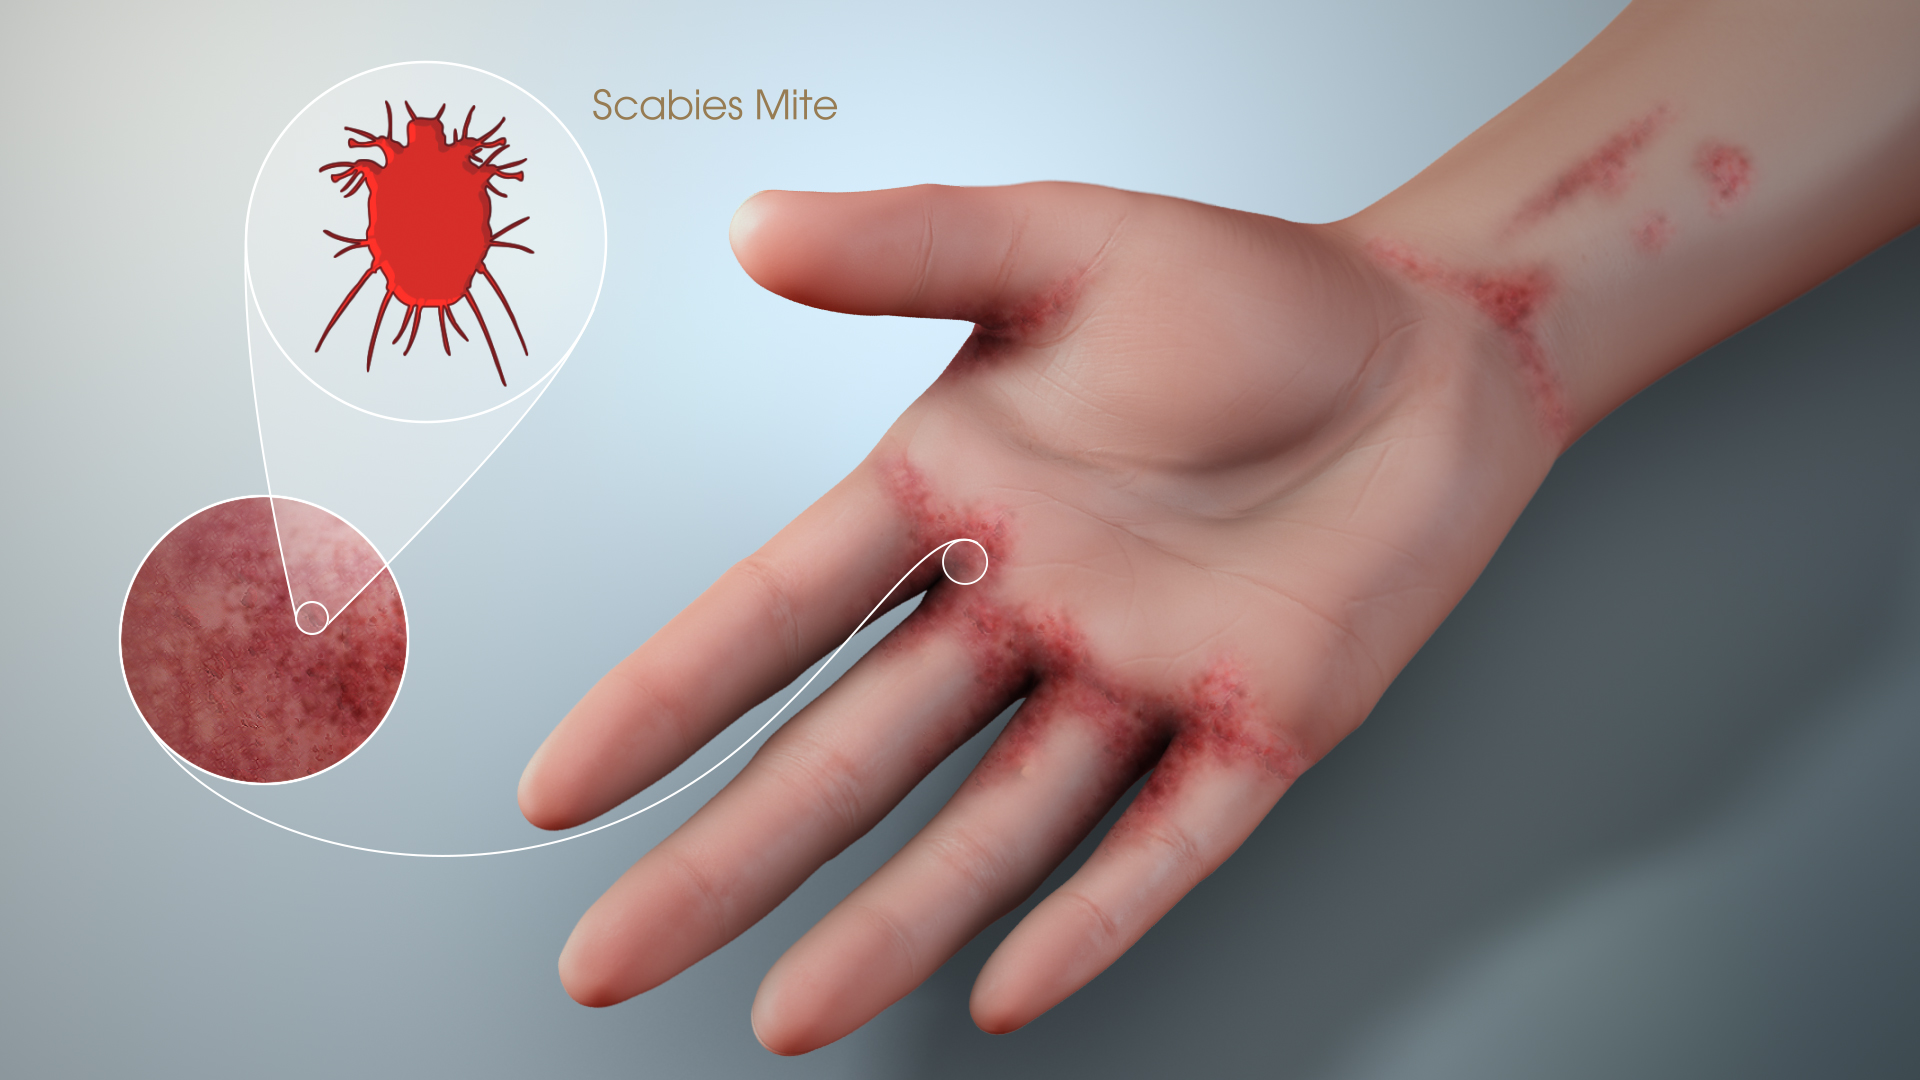 3D Medical Animation still showing Scabies mites reproducing on the surface of the skin